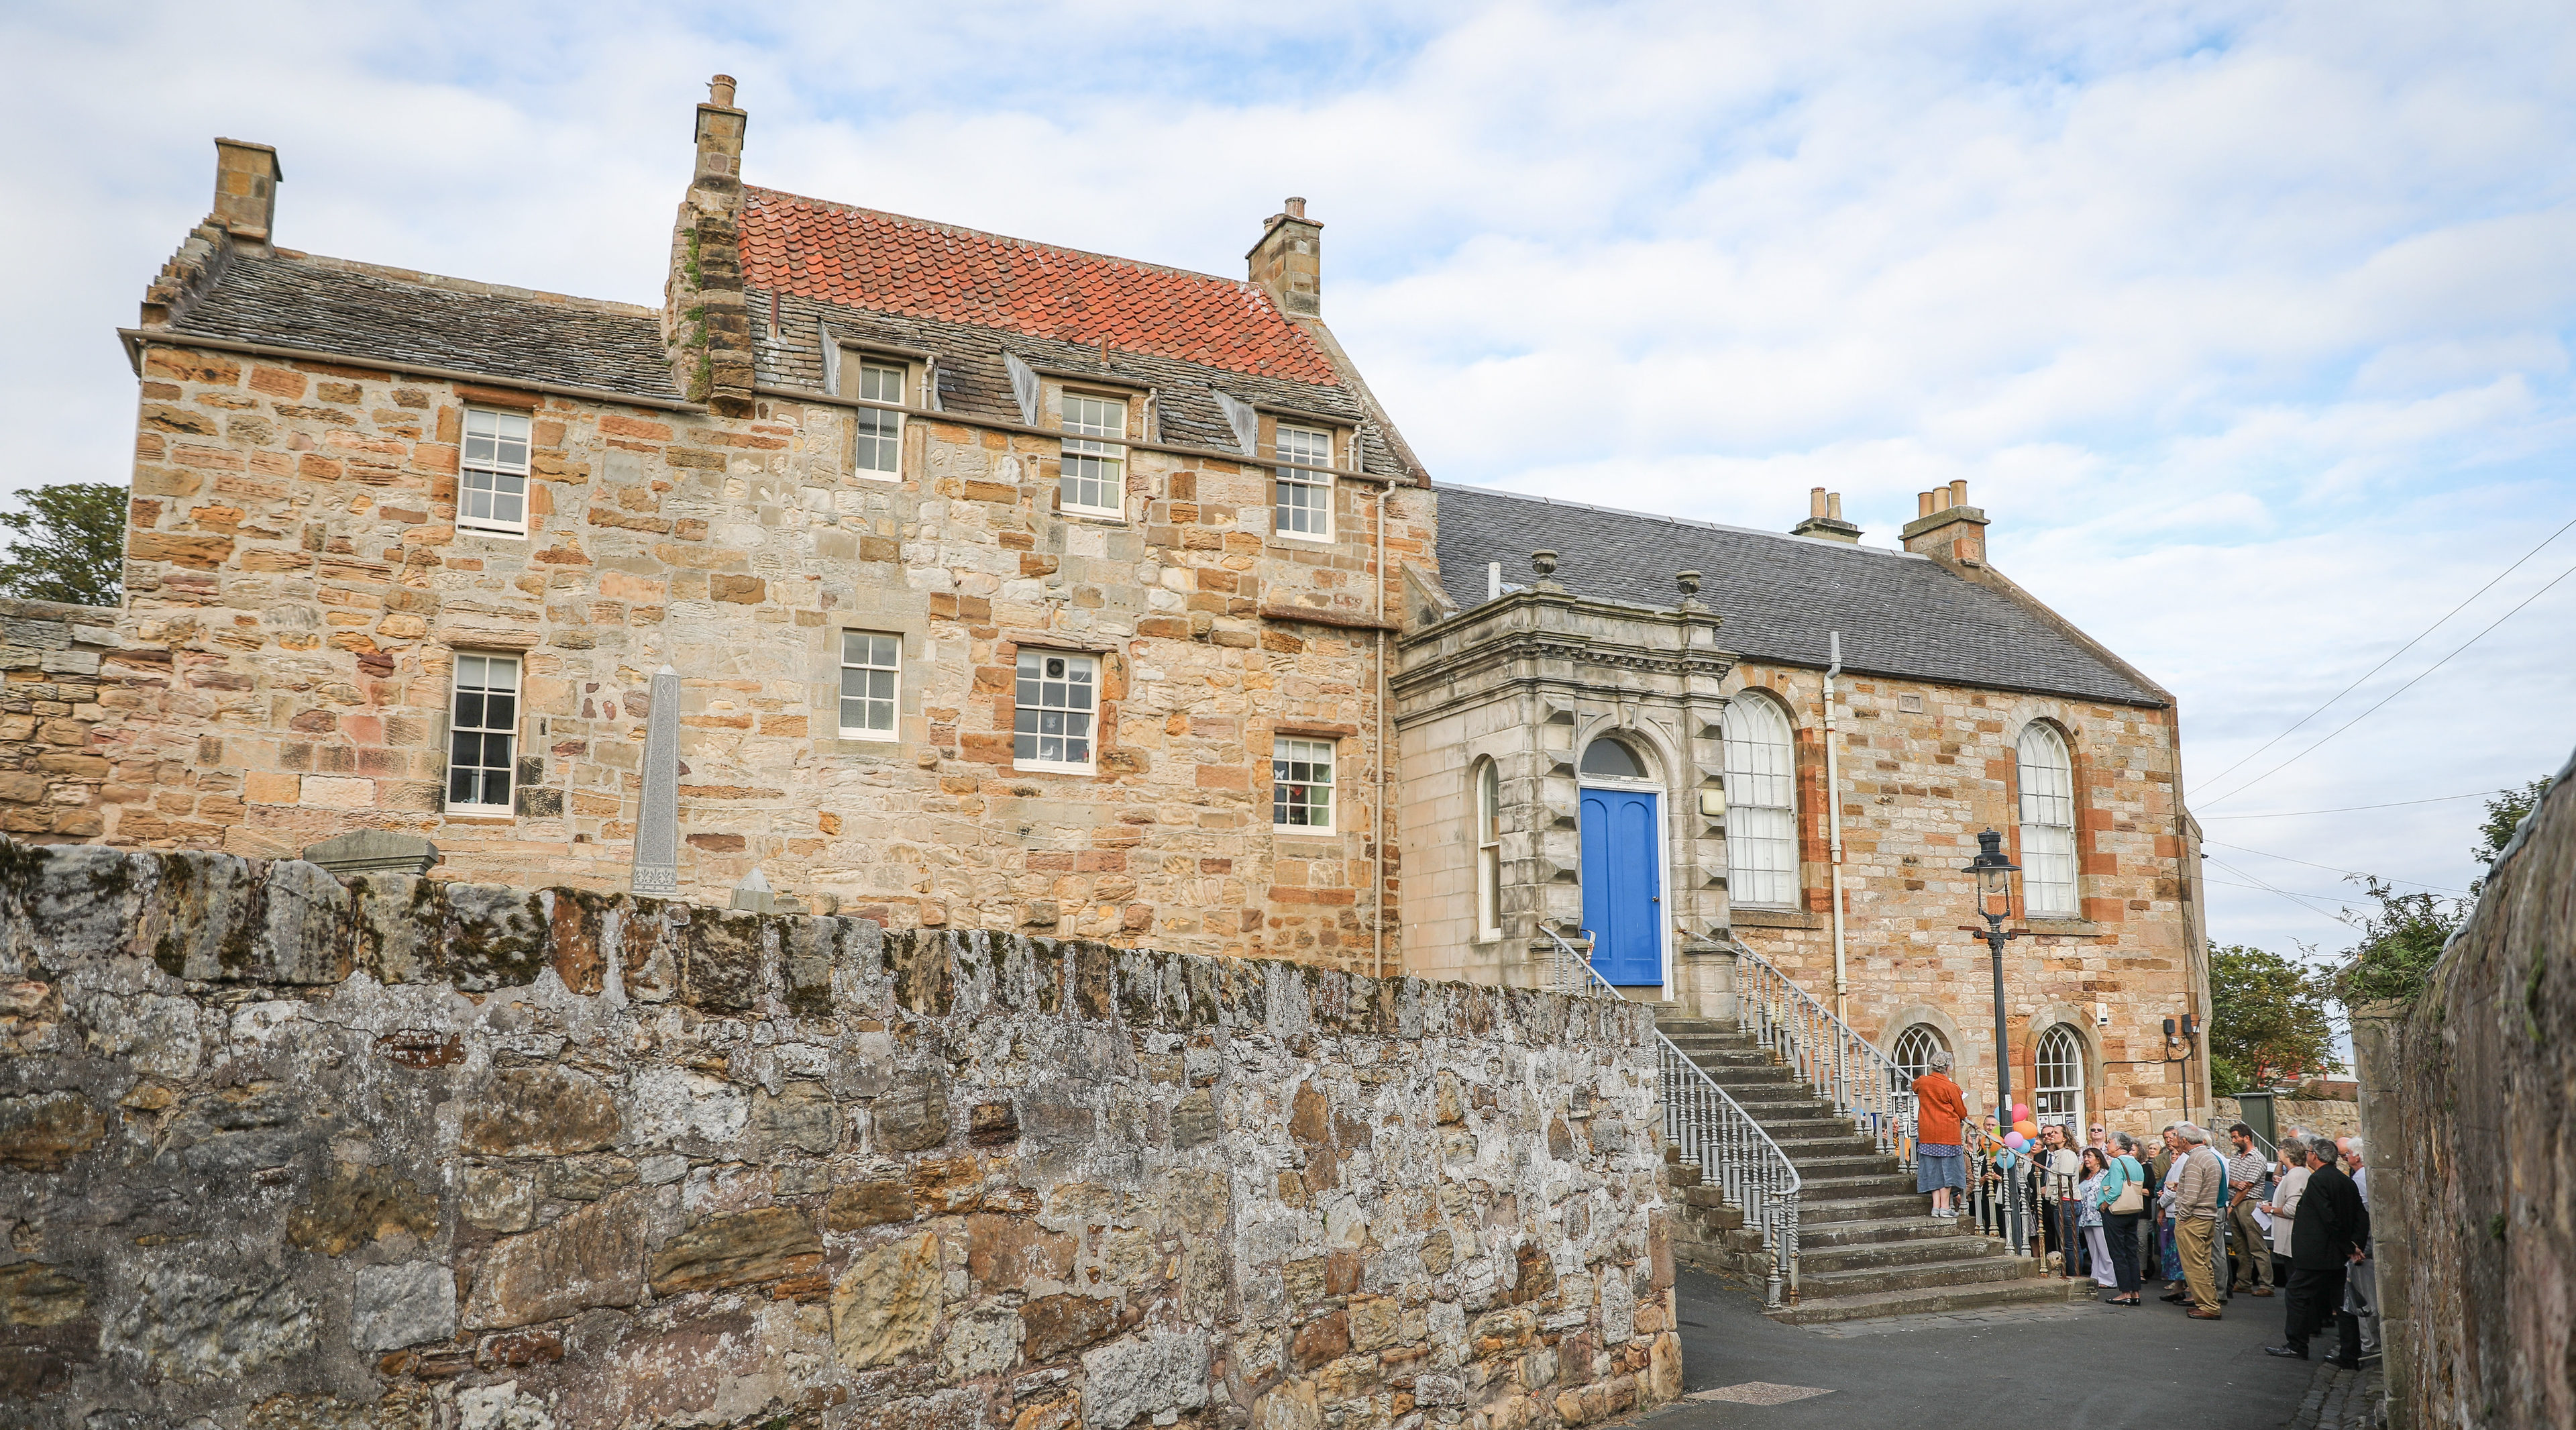 Pittenweem library is now run by the community after being earmarked for closure